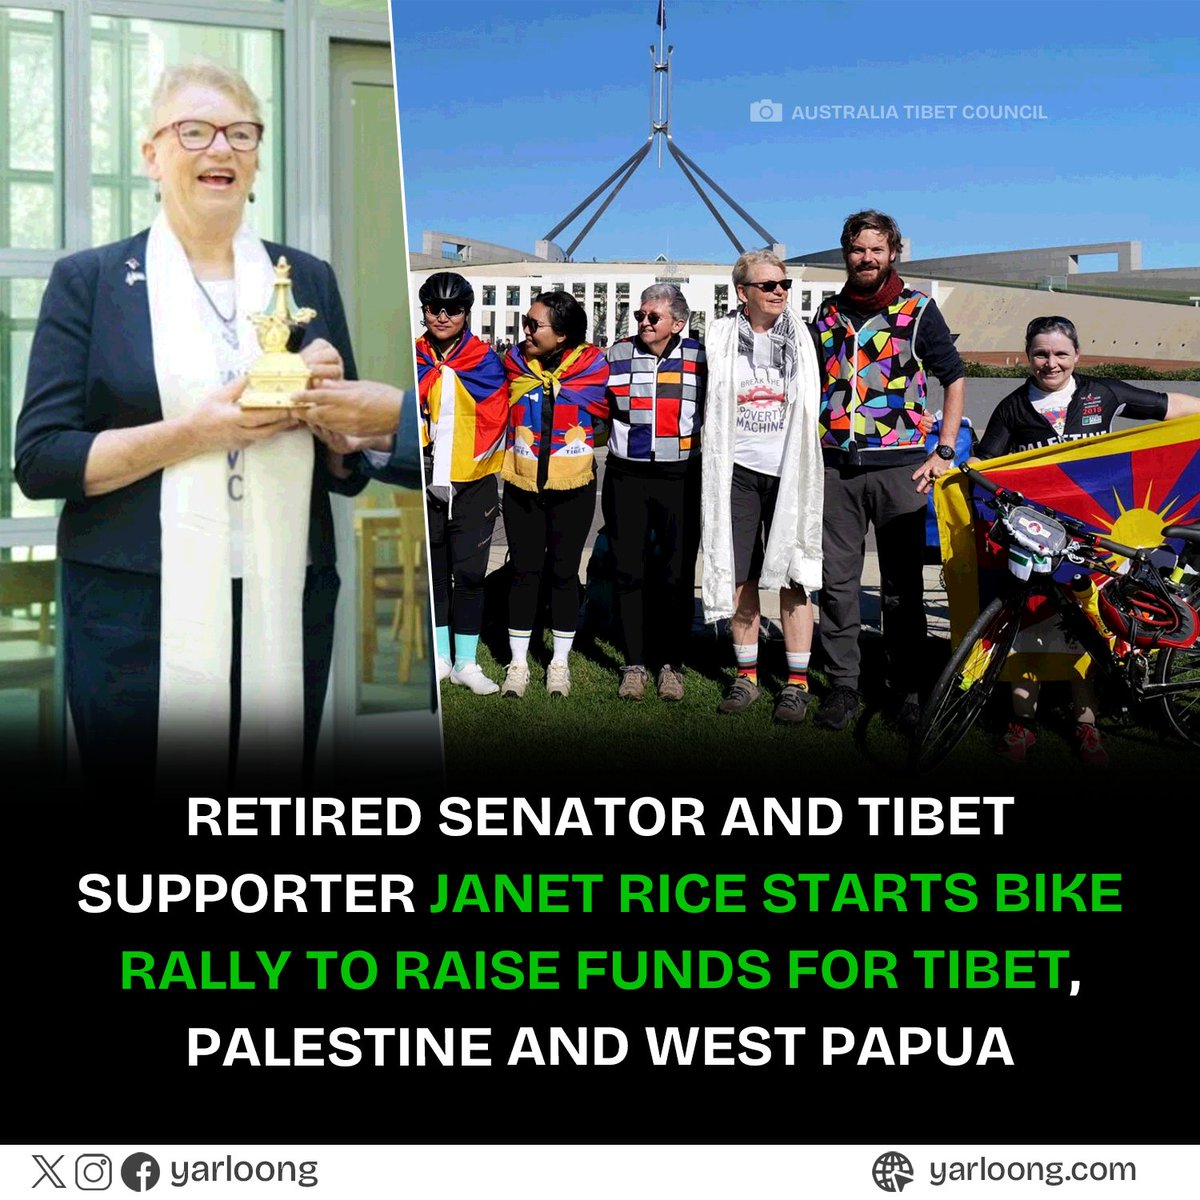 Starting on May 14, it commemorates ten years since her original Ride to Canberra. Funds will support the Australian Tibet Council, the Australian Palestine Advocacy Network and the Australia-West Papua Association. 

#JanetRice #BikeRally #HumanRights #SupportTibet  #yarloong